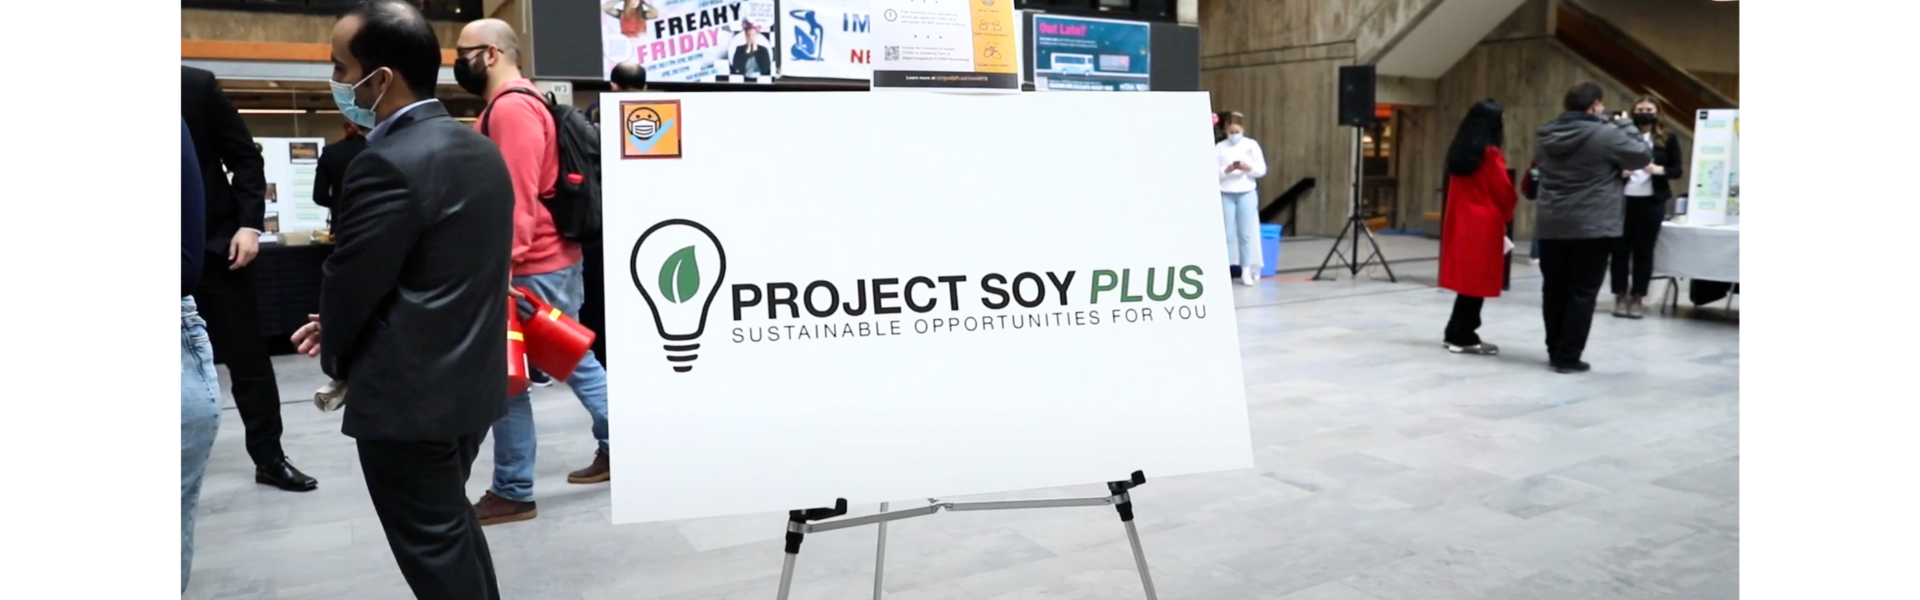 Welcoming banner on stand against the University Centre background, labelled "Project SOY Plus"